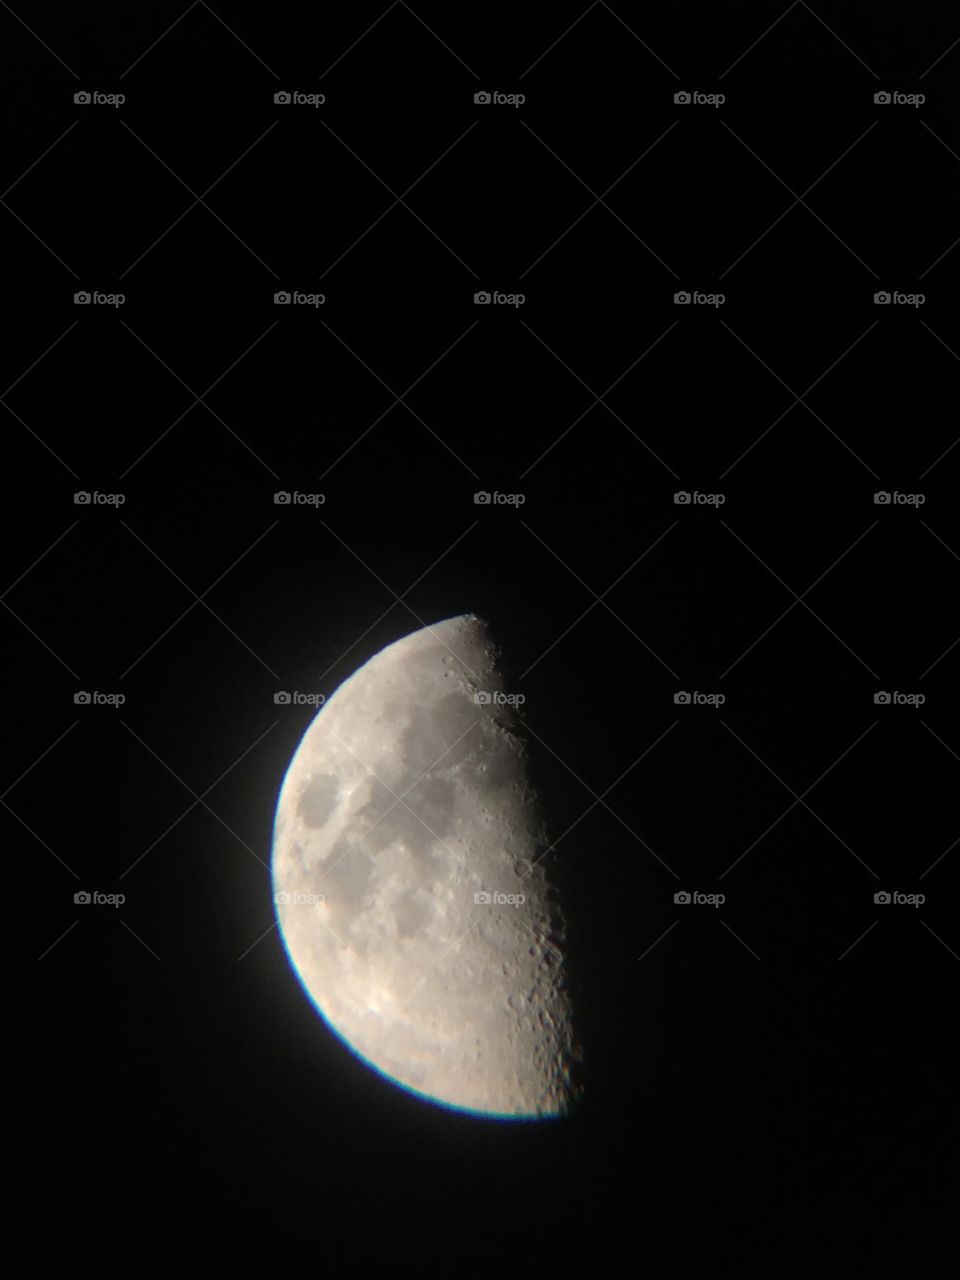 Perfect representation of what an iPhone and a telescope can do together.